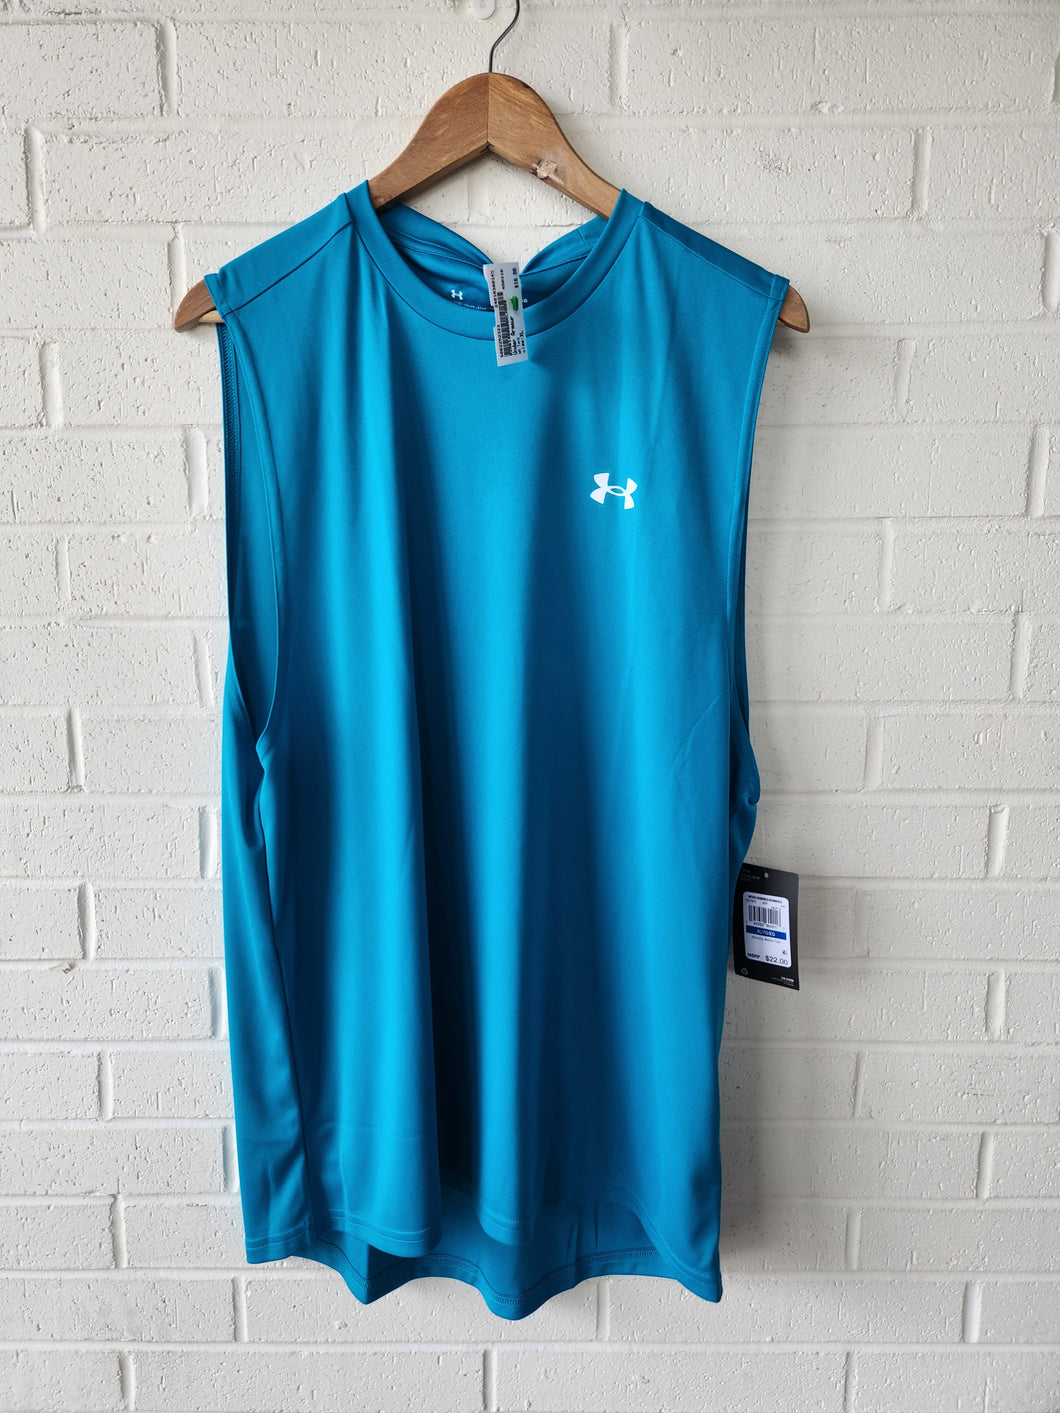 Under Armour Athletic Top Size Extra Large